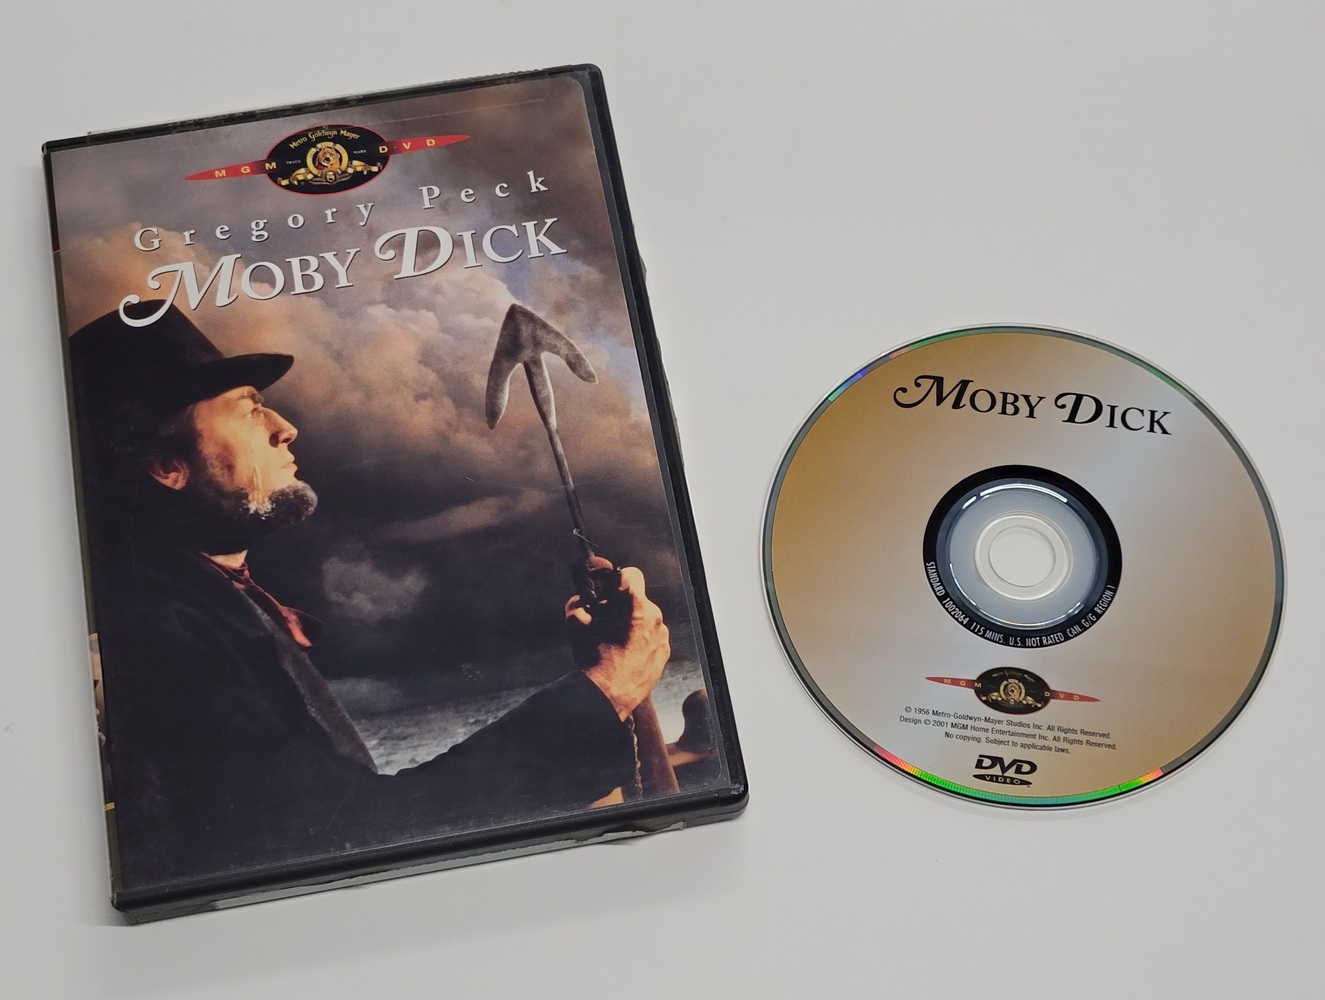 MOBY DICK - GREGORY PECK - DVD **RARE** HERMAN MELVILLE CLASSIC